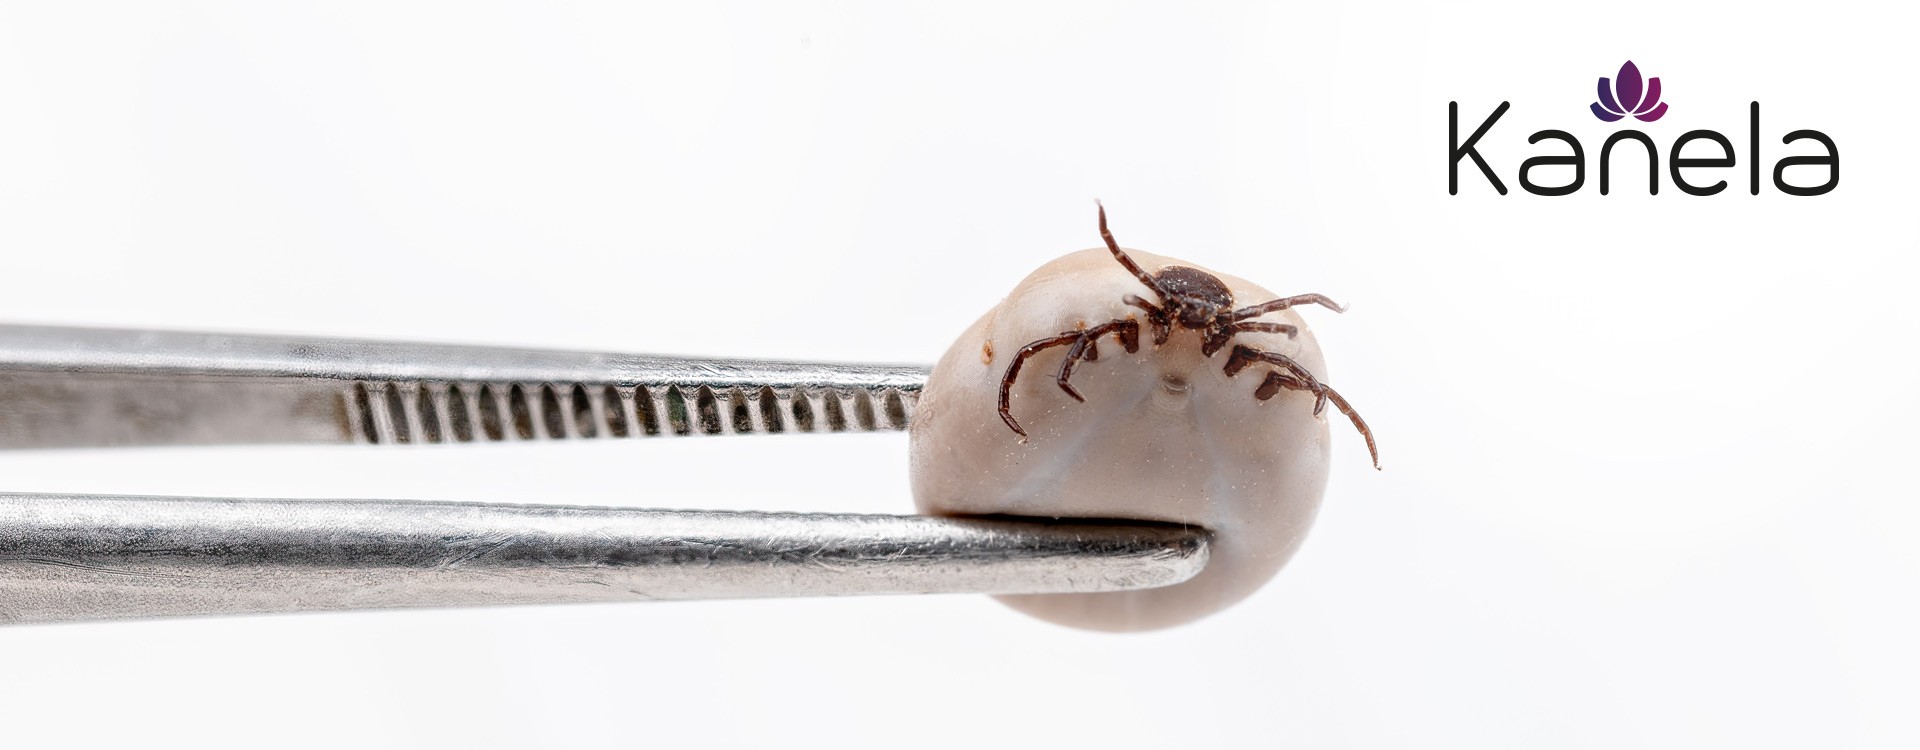 How to properly remove a tick